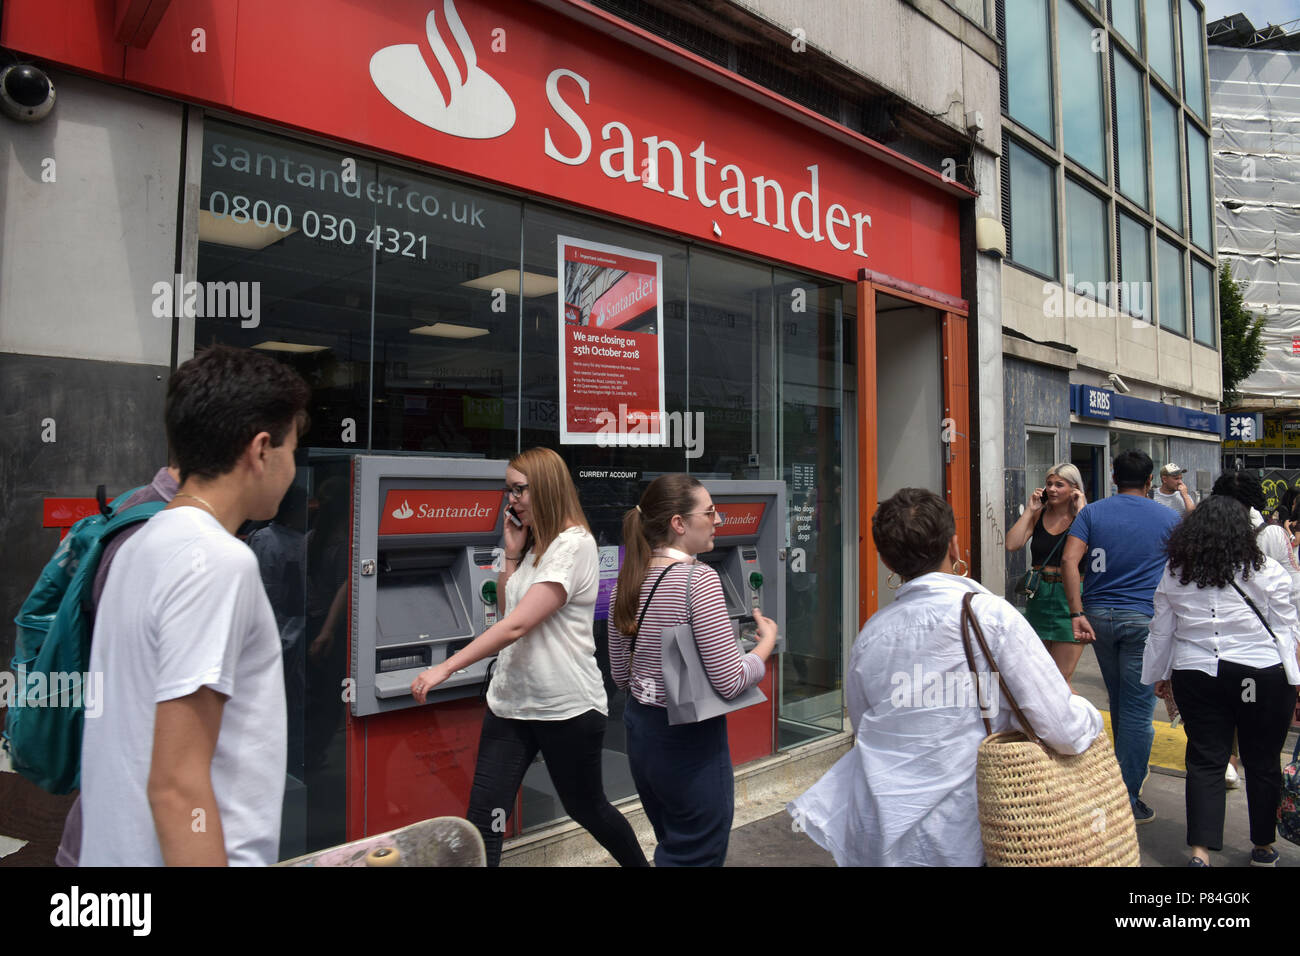 People walk past the Santander bank in Notting Hill, London, next to RBS. As part of a programme of closures this branch will close in October 2018. Stock Photo